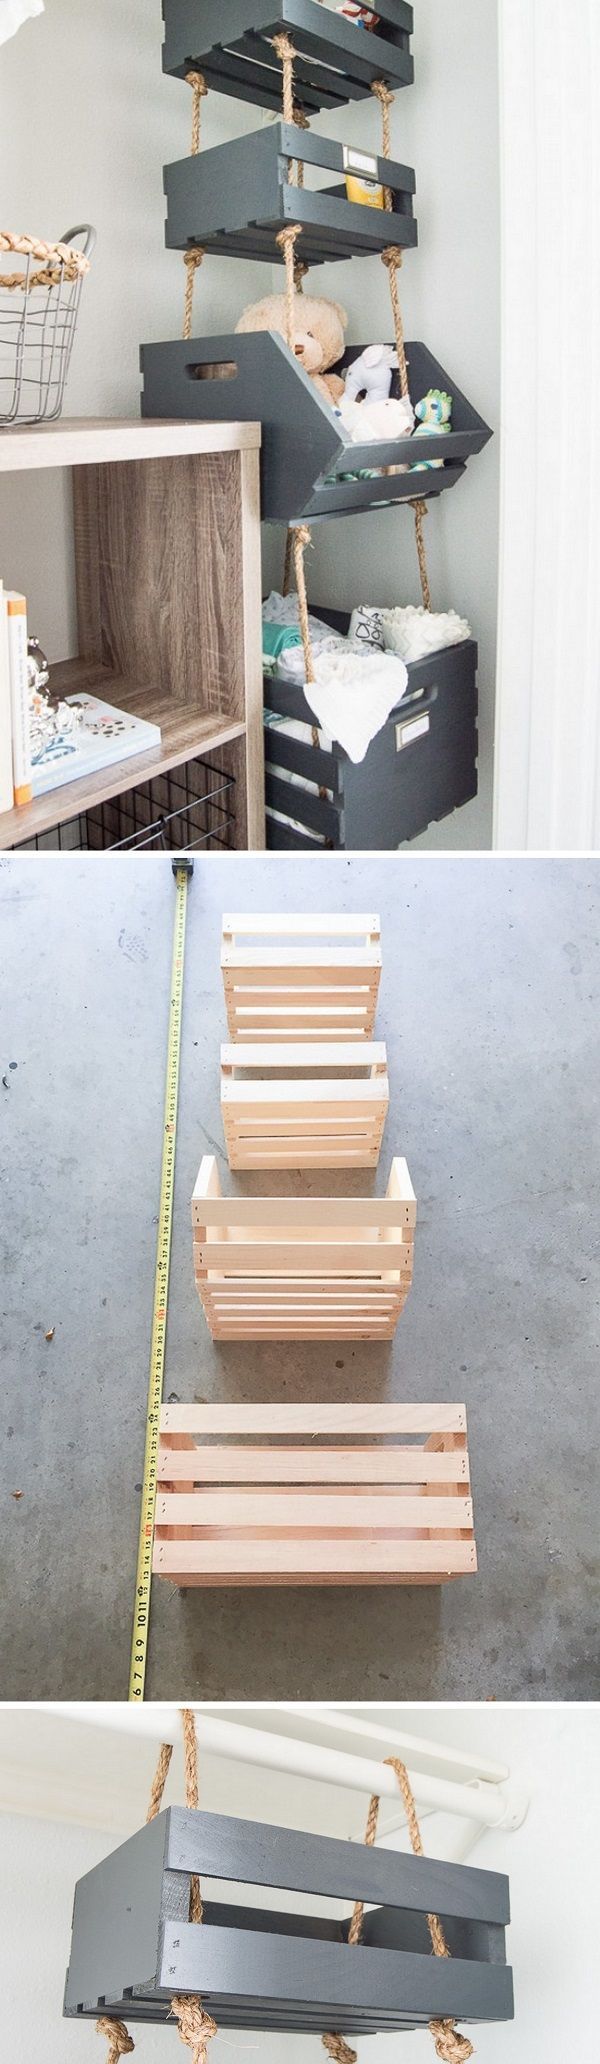 Check out the tutorial how to make DIY hanging closet crate shelves @istandarddesign